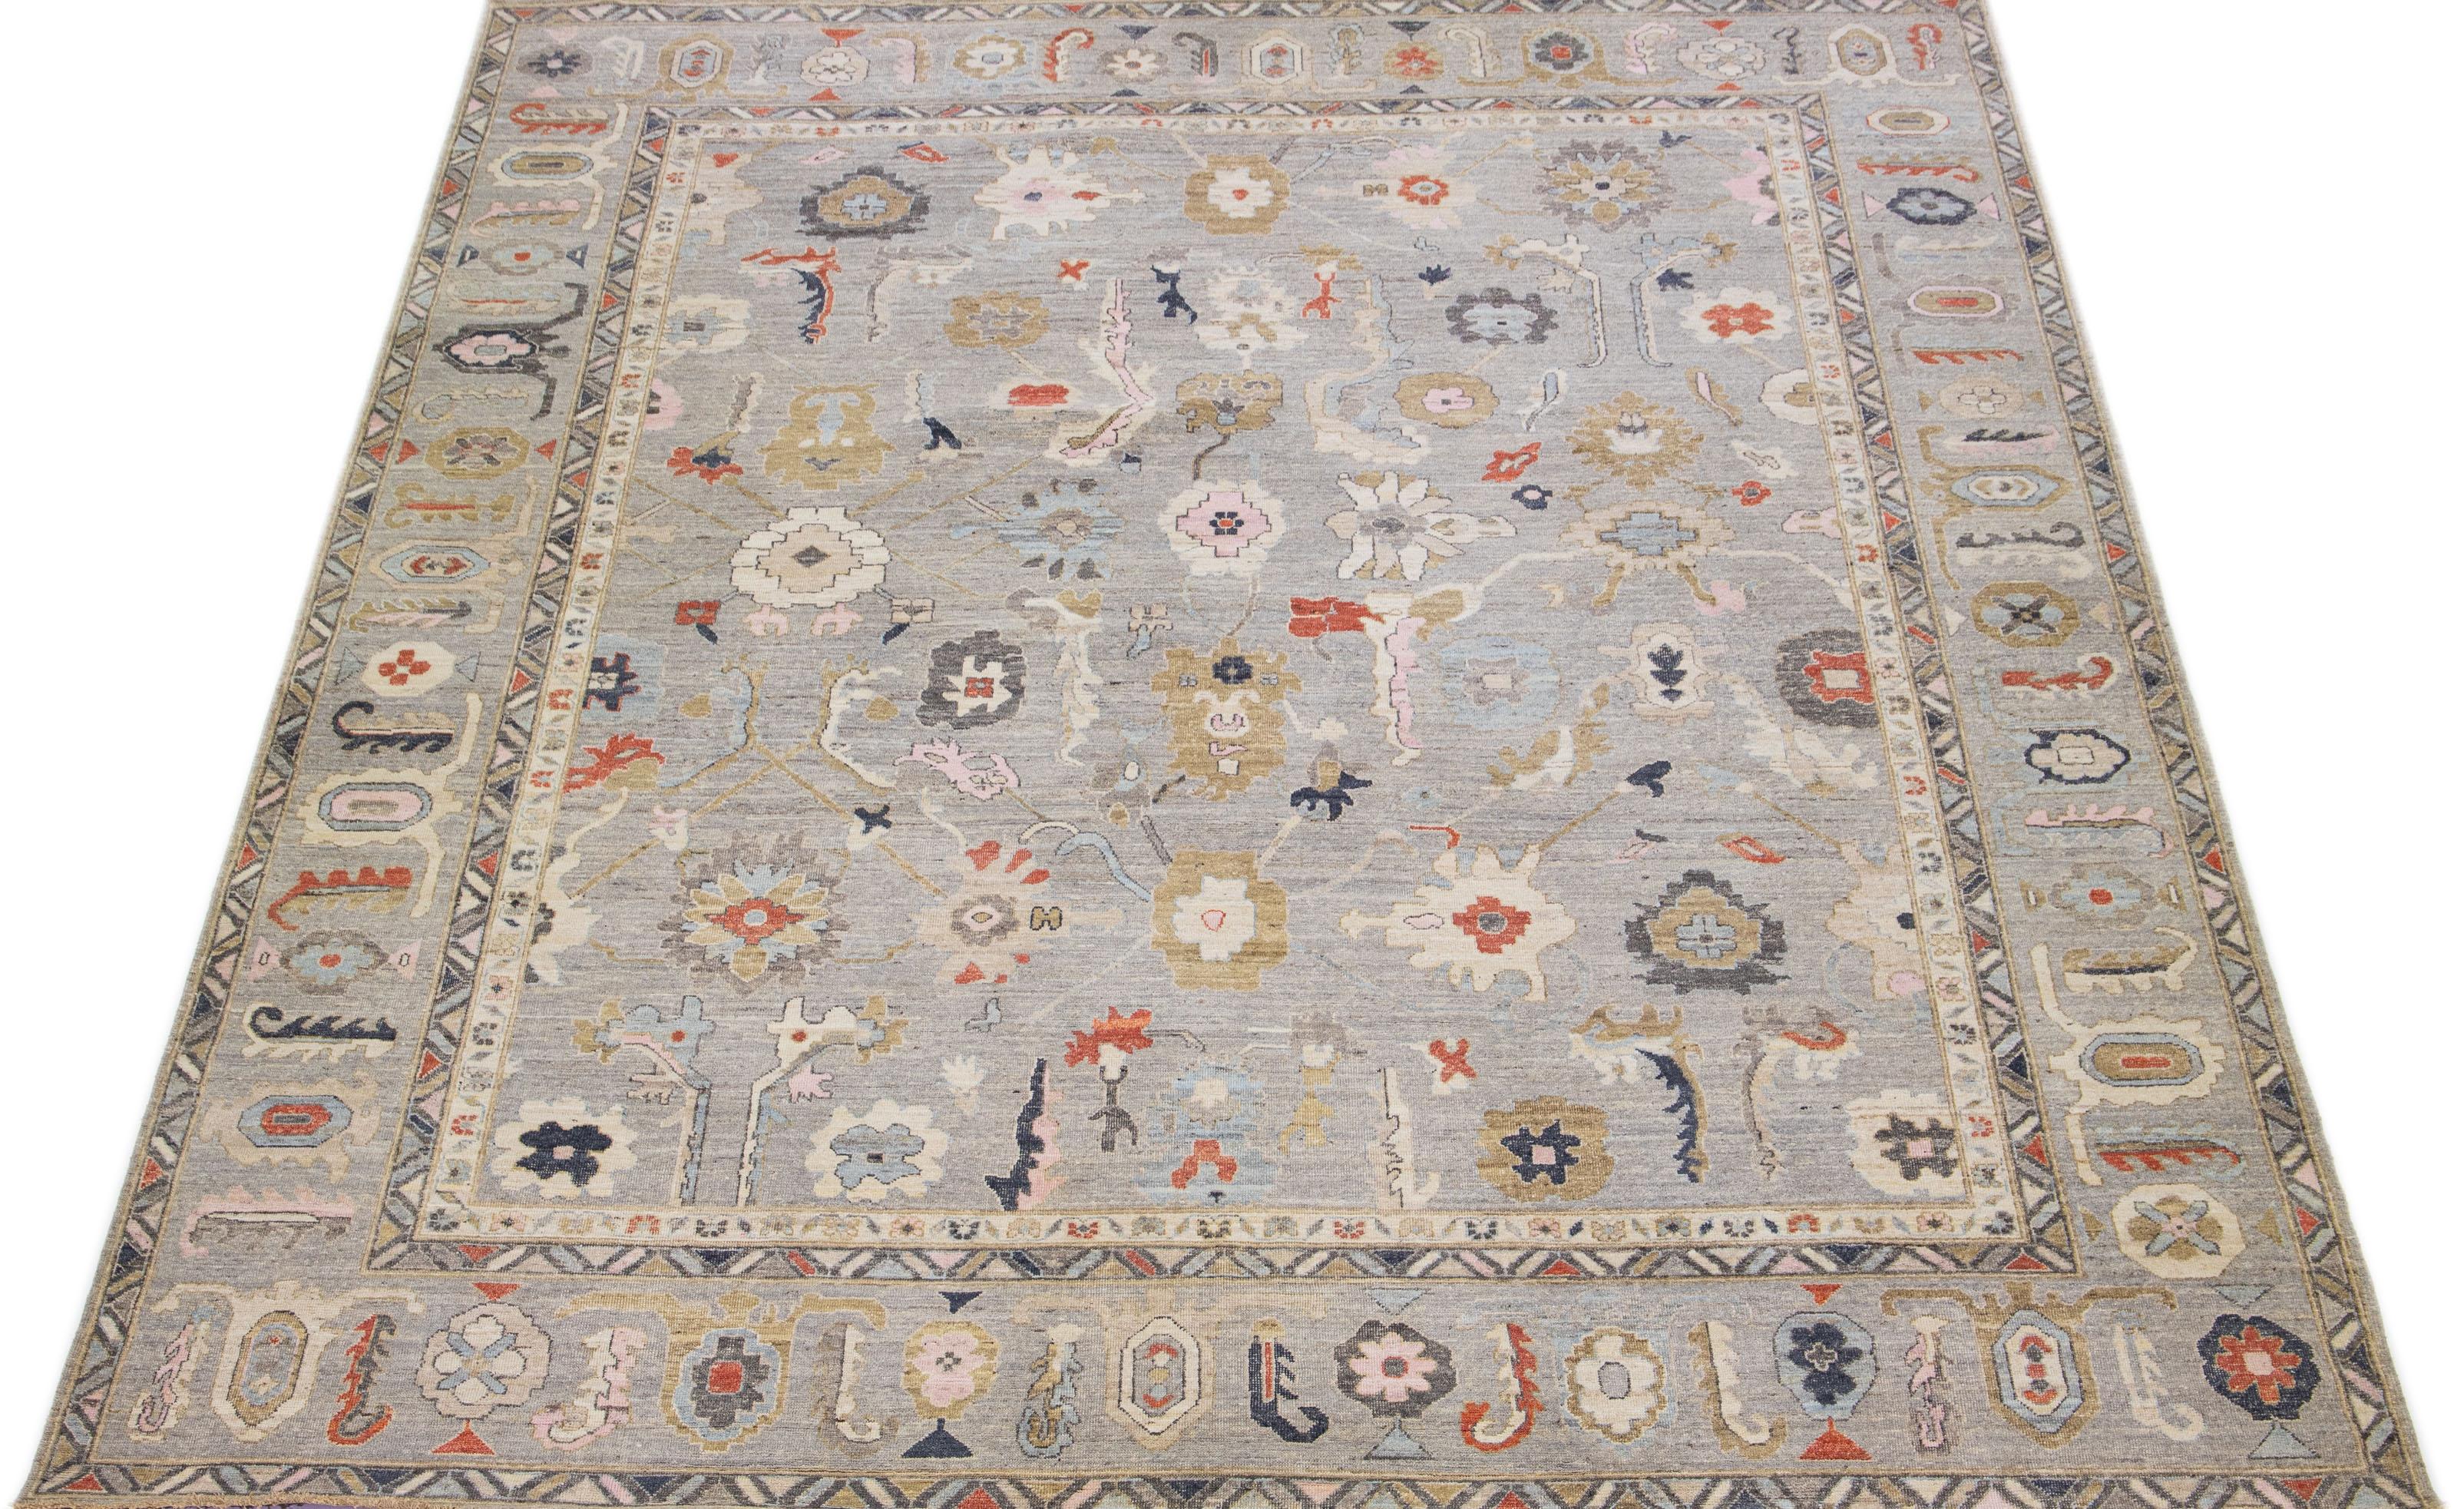 An exquisite oversized Sultanabad hand-knotted wool rug is presented, showcasing a stunning gray field with a design frame. The rug further highlights rust, blue, and pink accents in a breathtaking floral motif that embellishes the entire rug